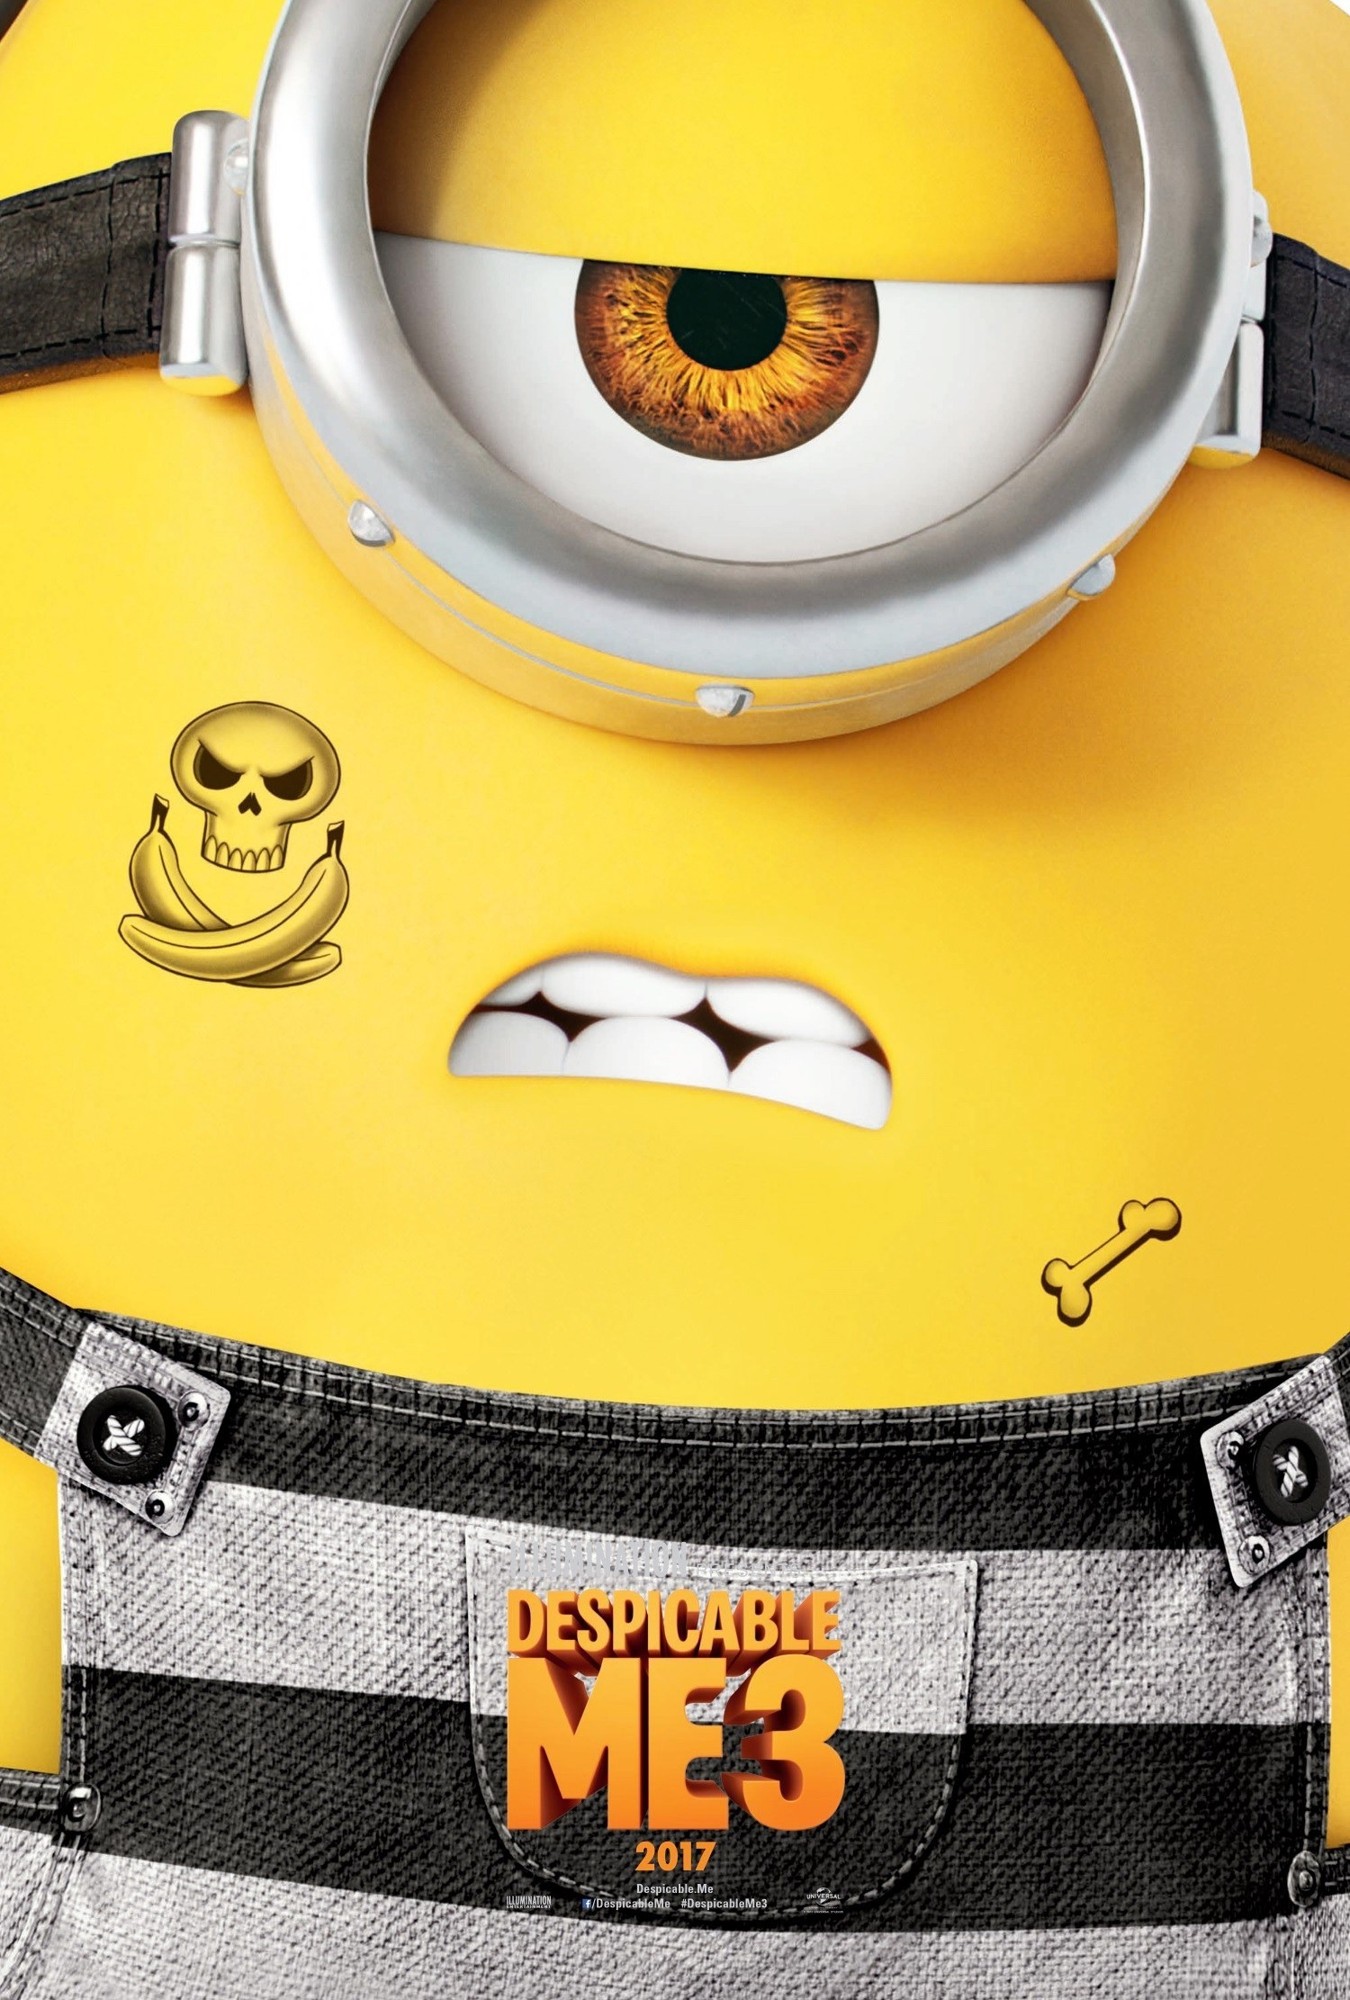 Despicable Me 3 download the new for apple